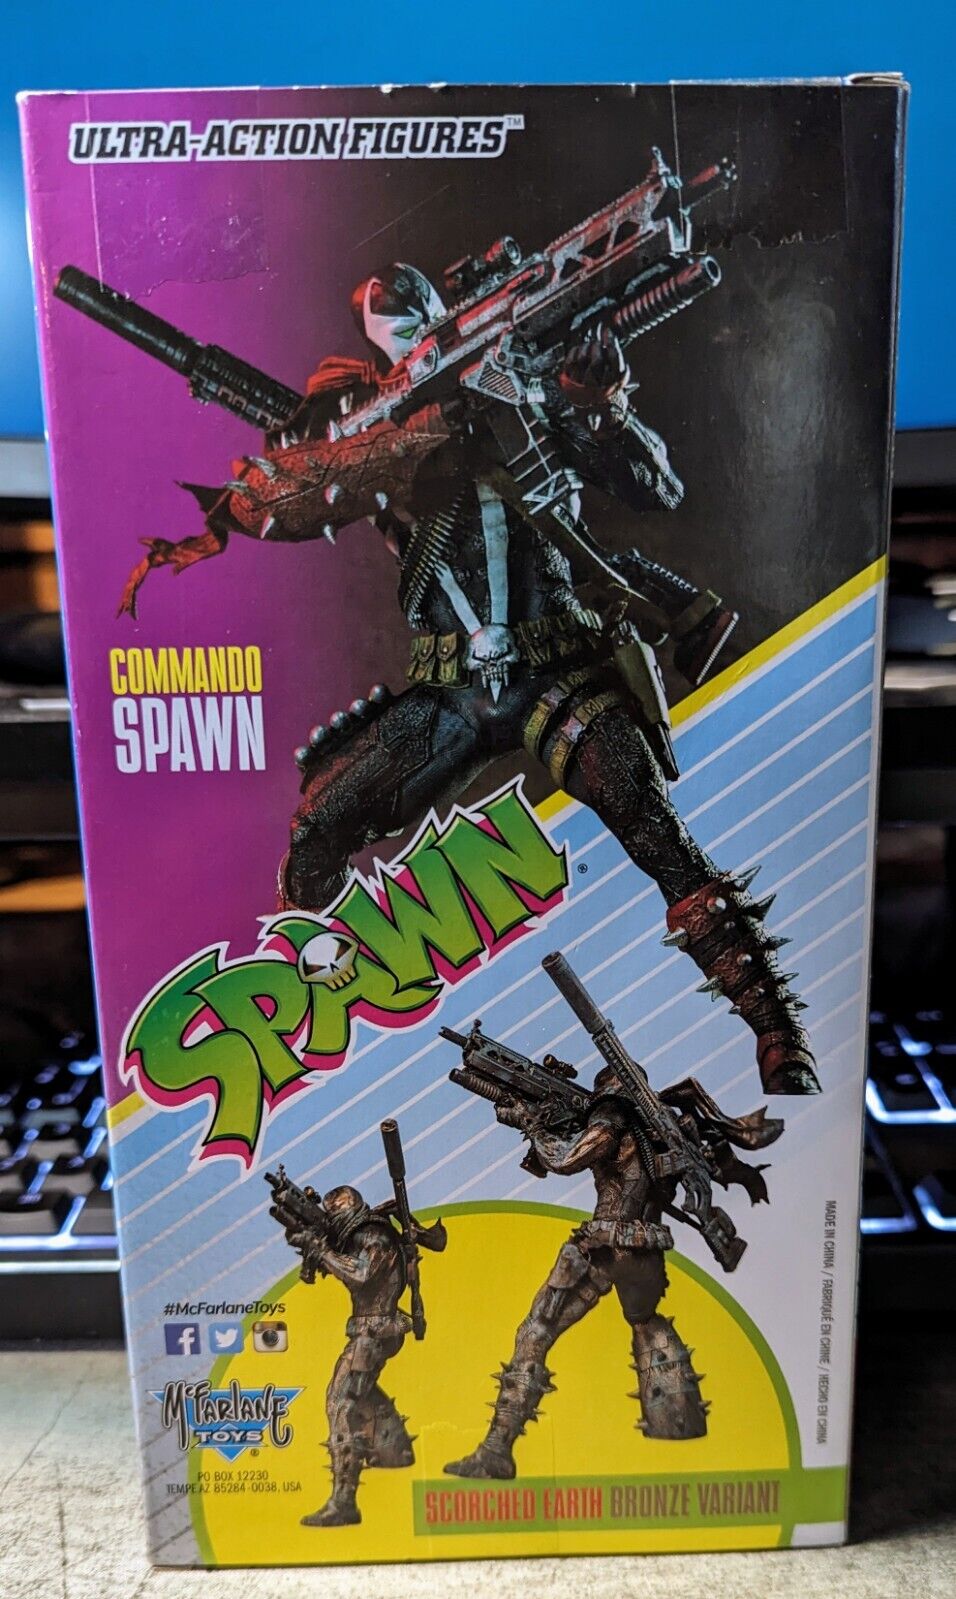 Spawn 7 Inch Action Figure Color Tops Series - Commando Spawn